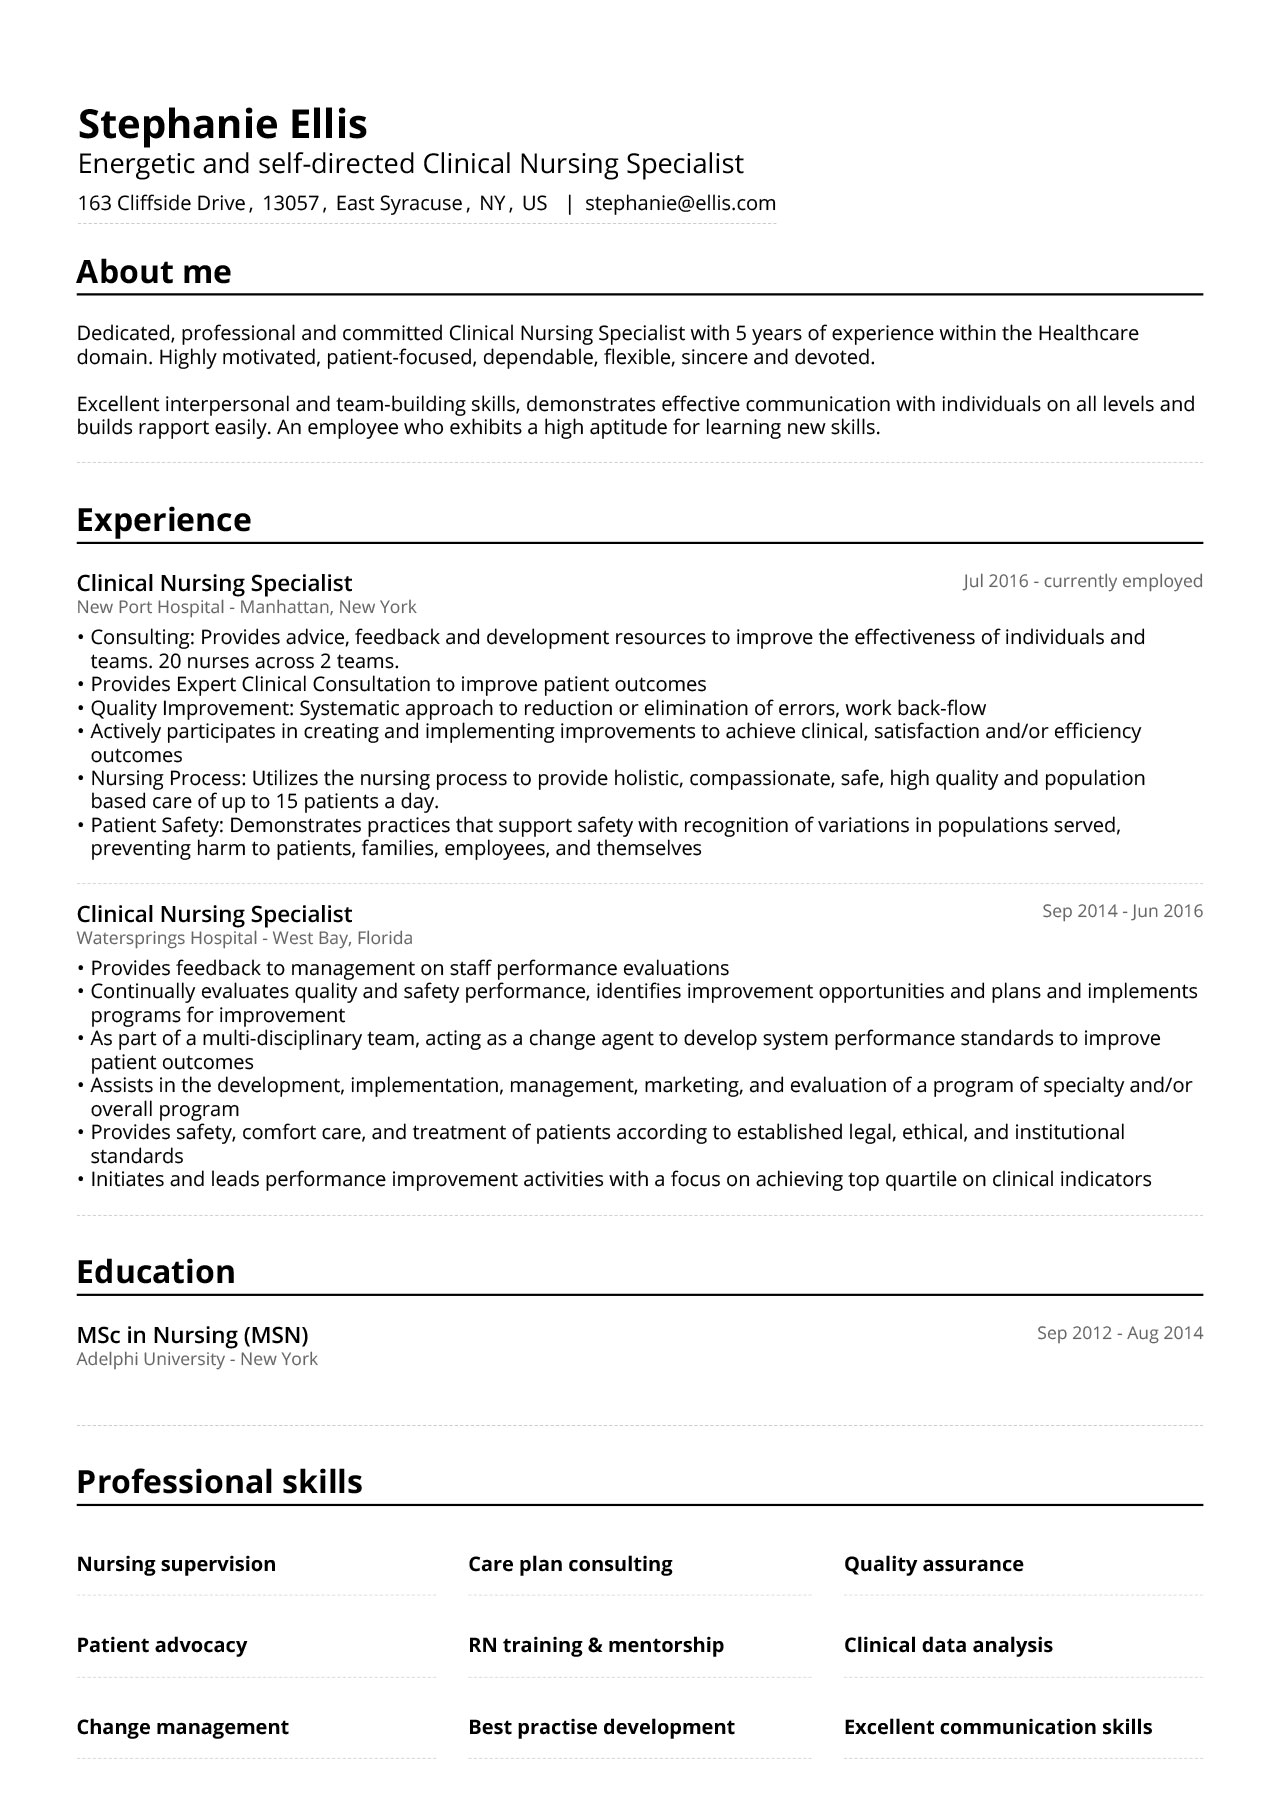 Don't Fall For This ResumeGets assistant resume examples Scam